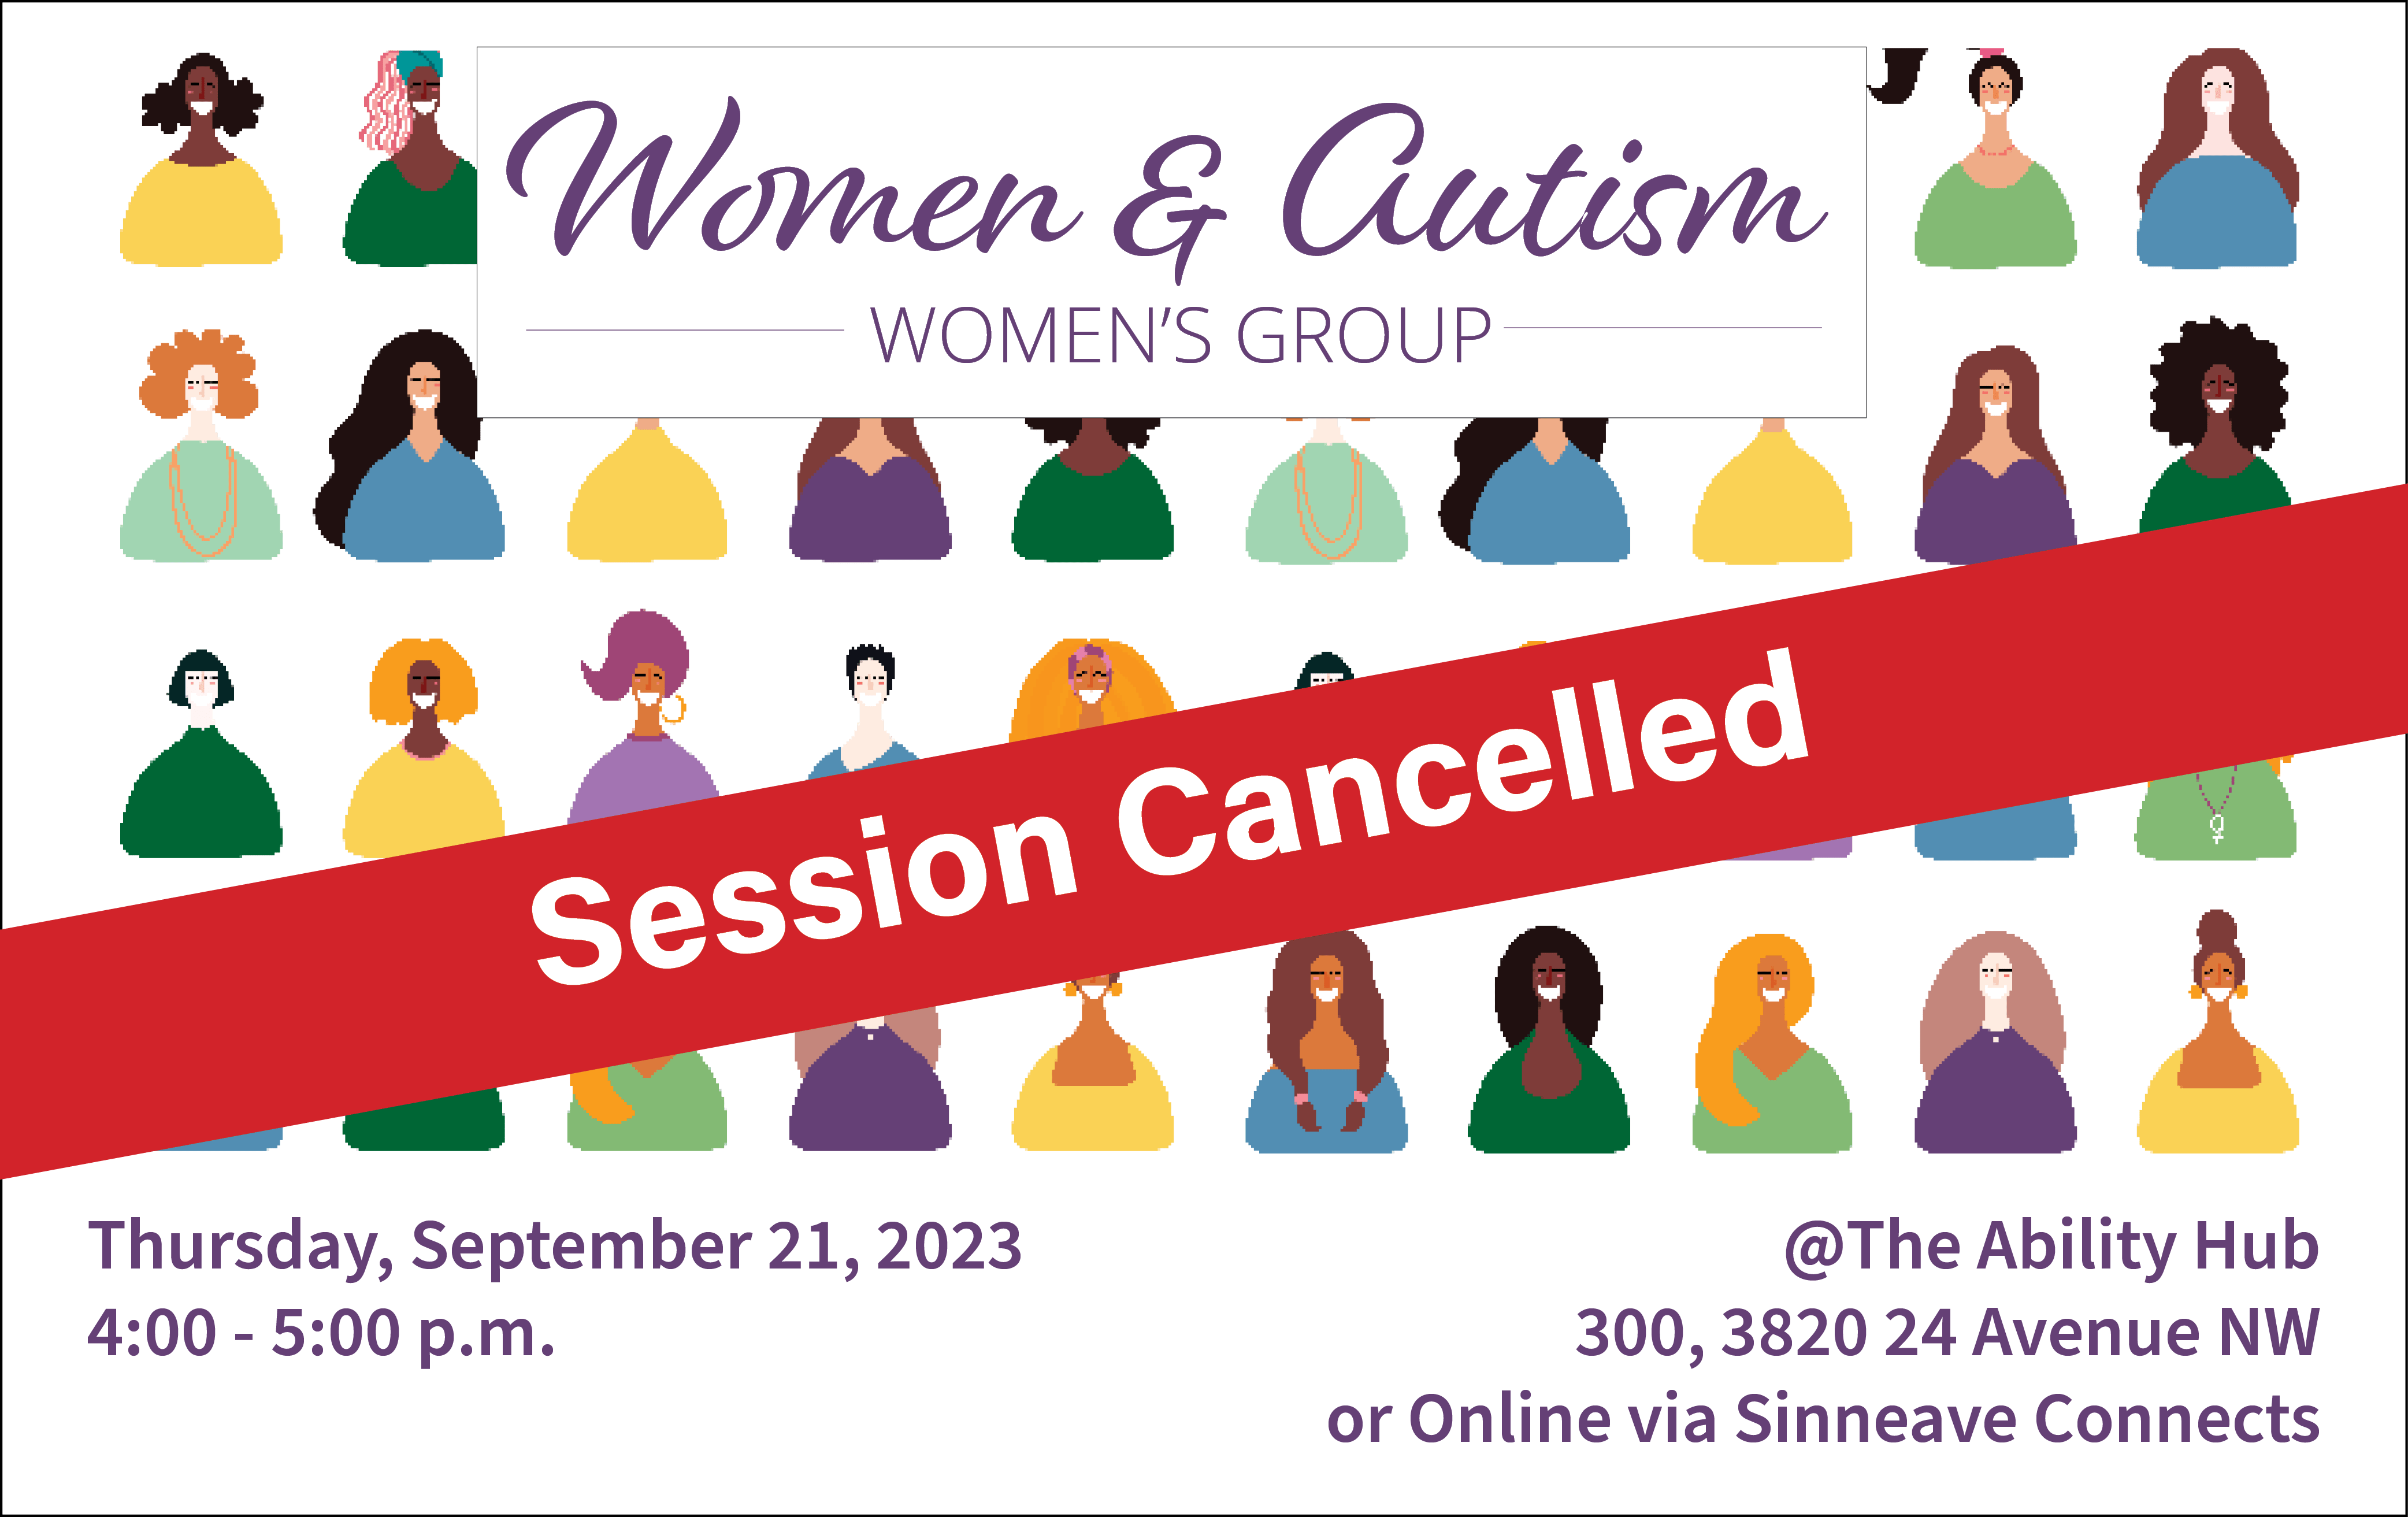 An illustration of rows of many women who are different colours, shapes and sizes. There is a red banner across the image saying Session Cancelled.